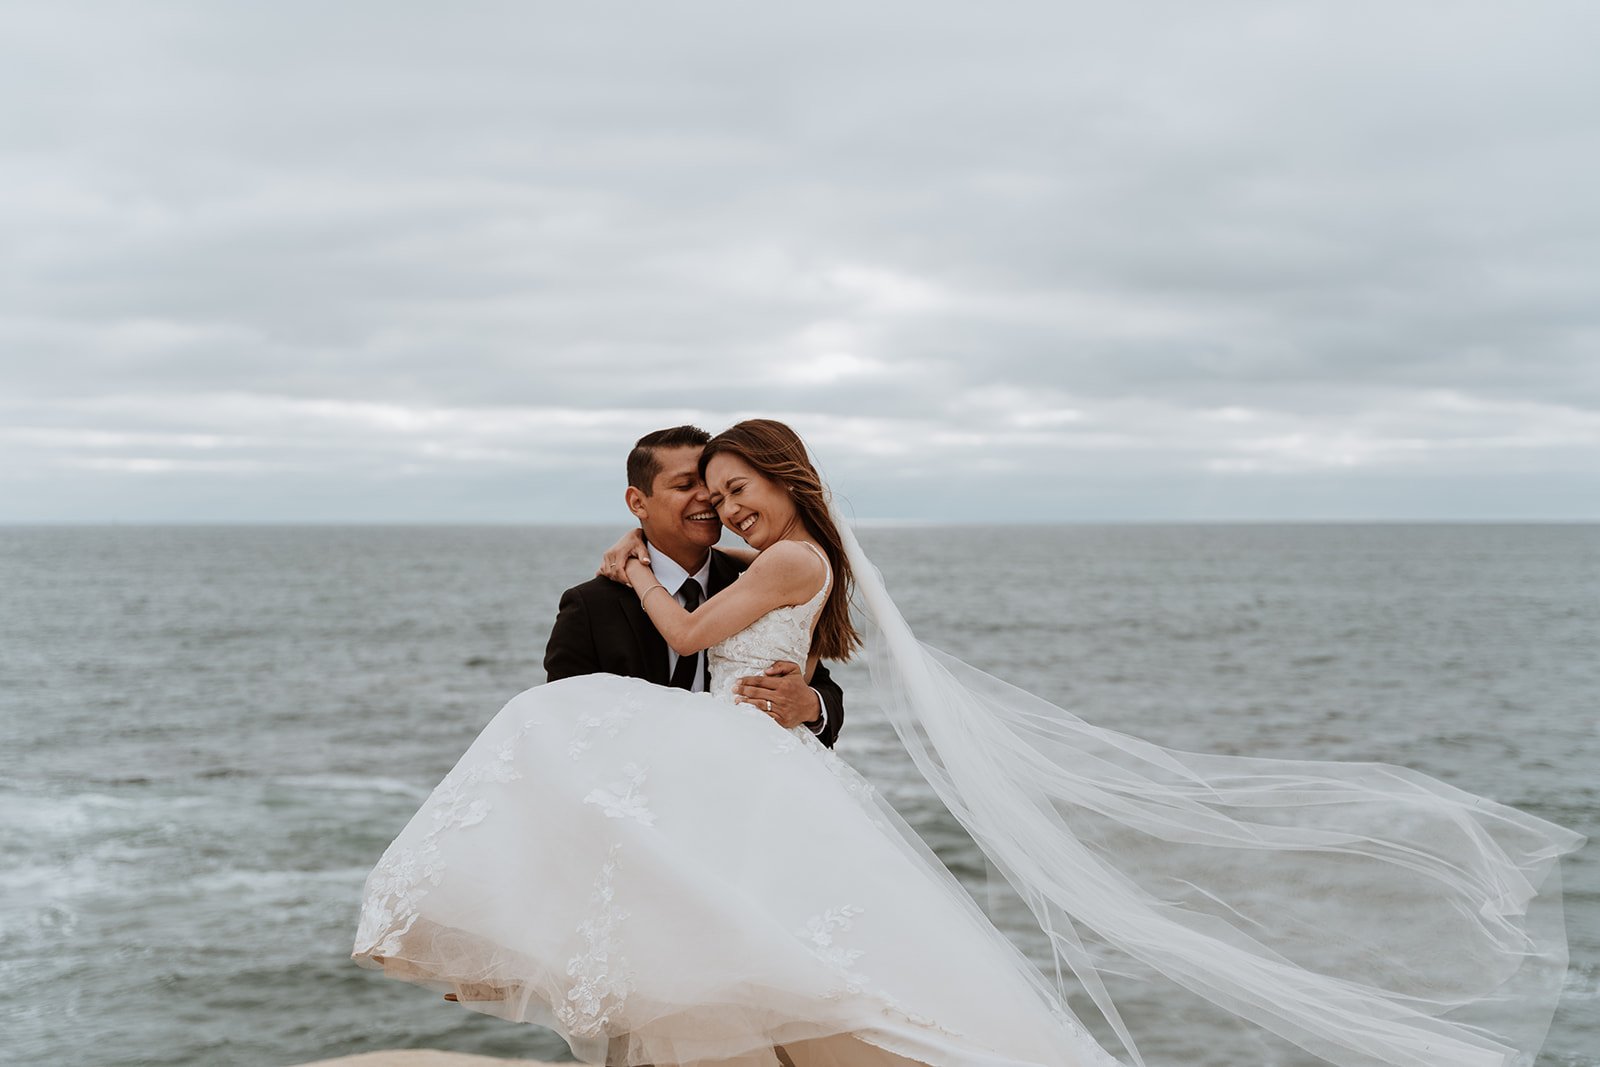 Groom holds bride while in wedding gear as they laugh standing in front of the ocean